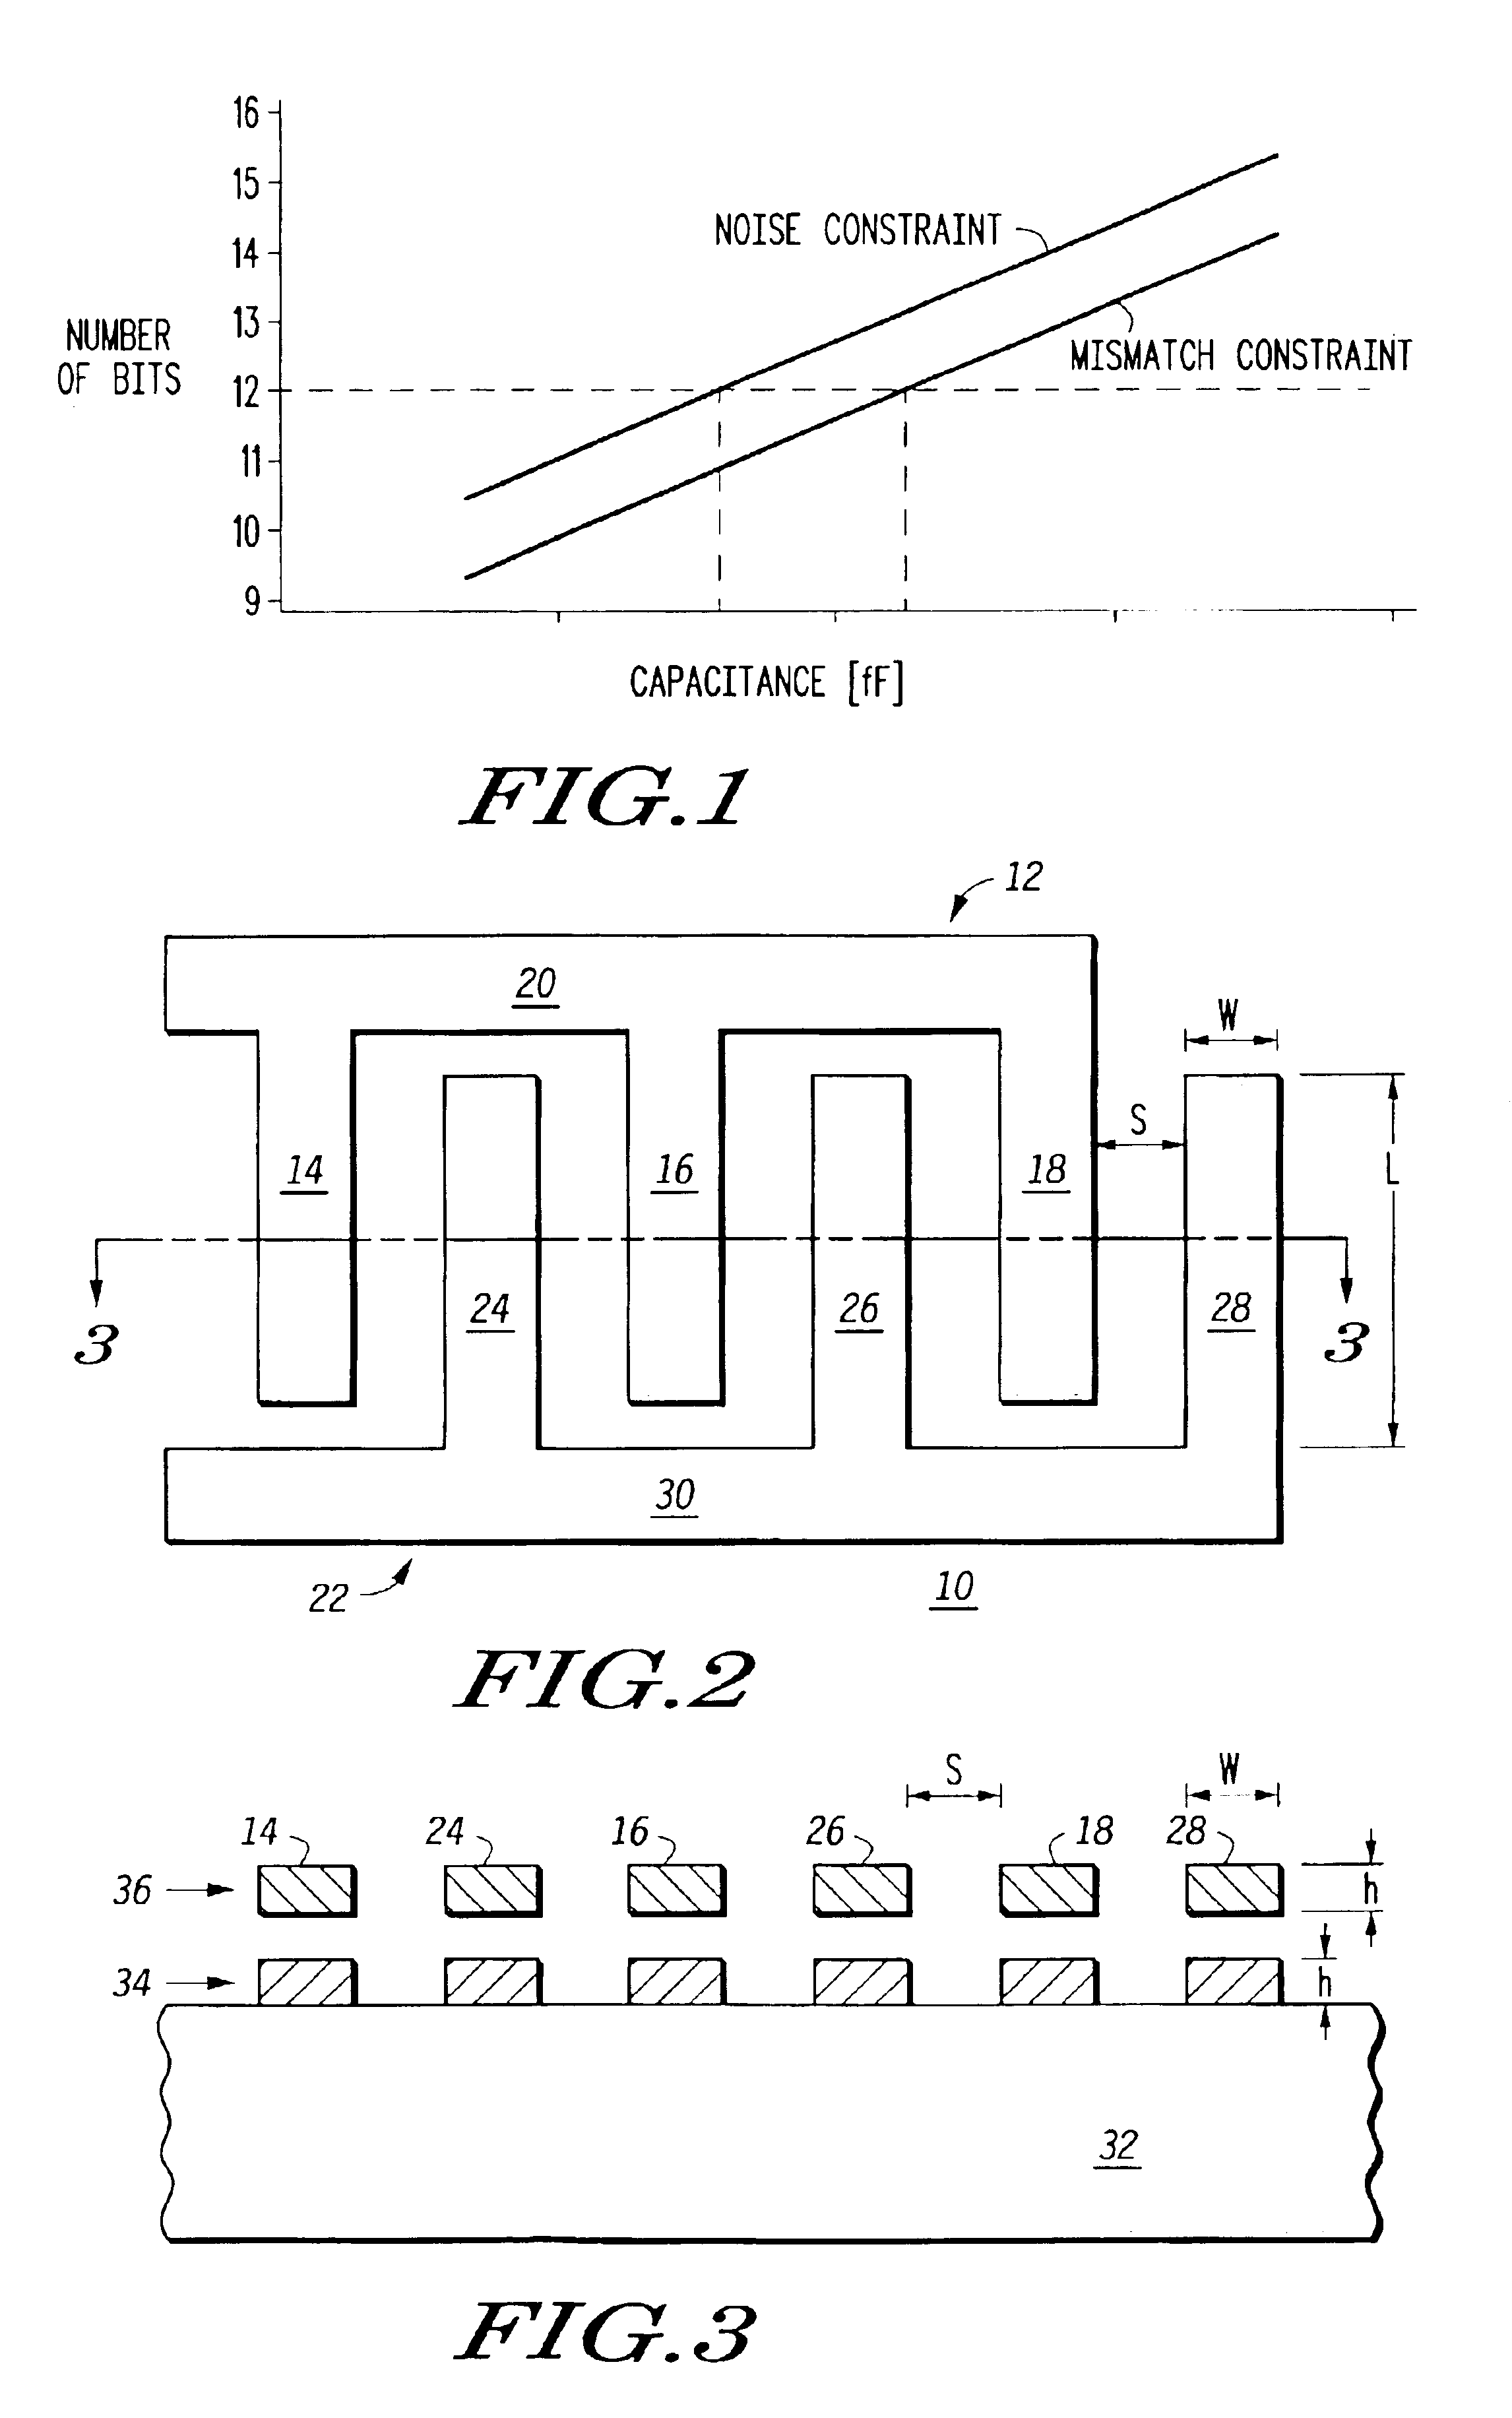 Method for improving capacitor noise and mismatch constraints in a semiconductor device